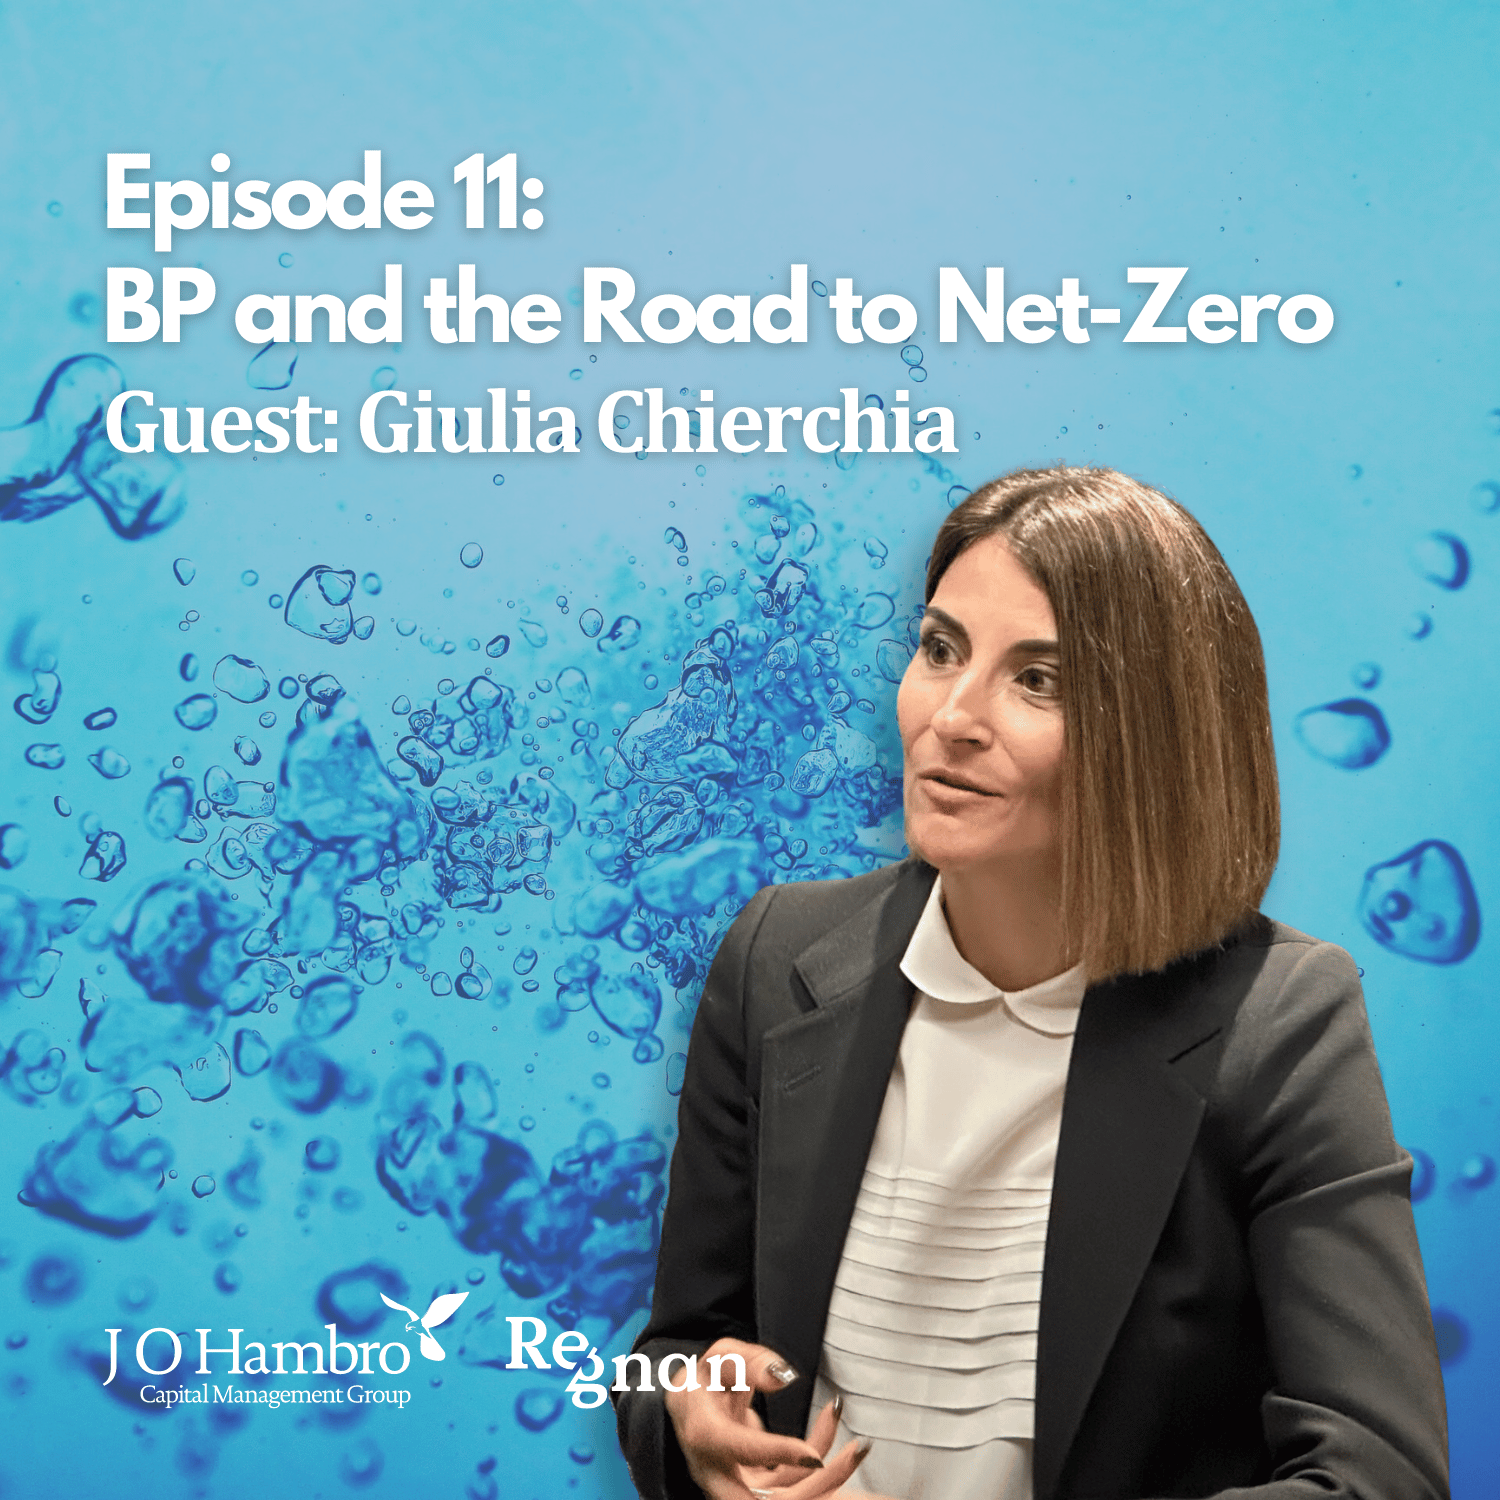 Episode 11: BP and the Road to Net-Zero